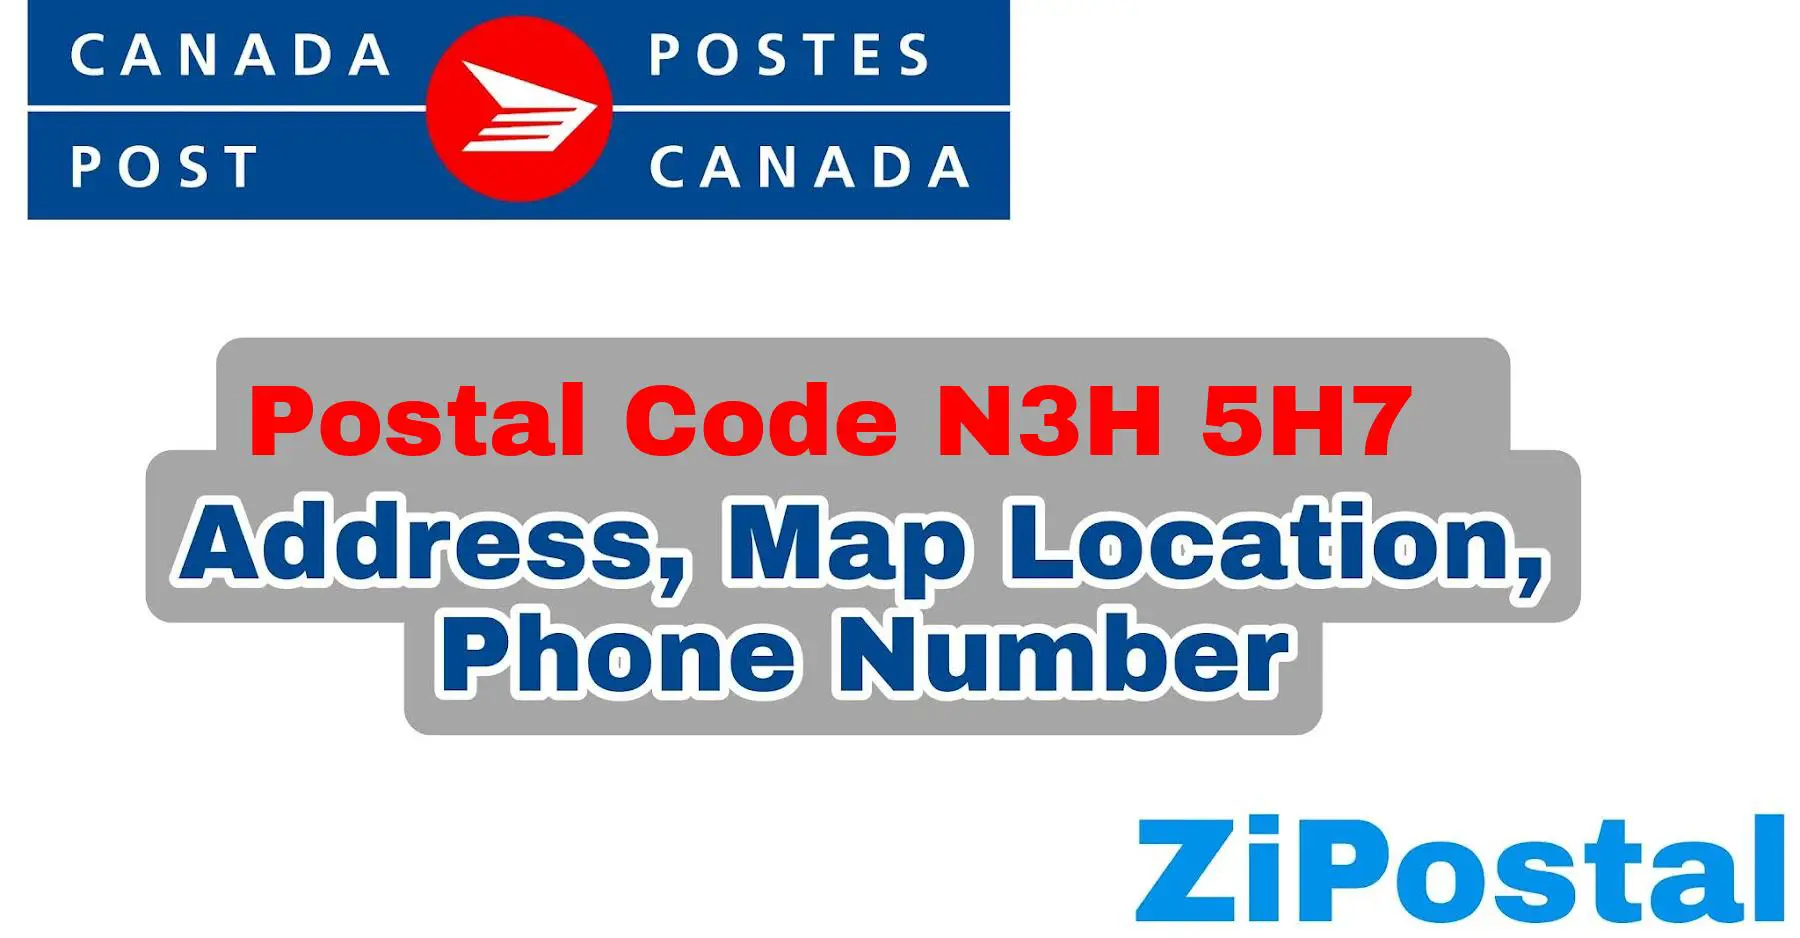 Postal Code N3H 5H7 Address Map Location and Phone Number